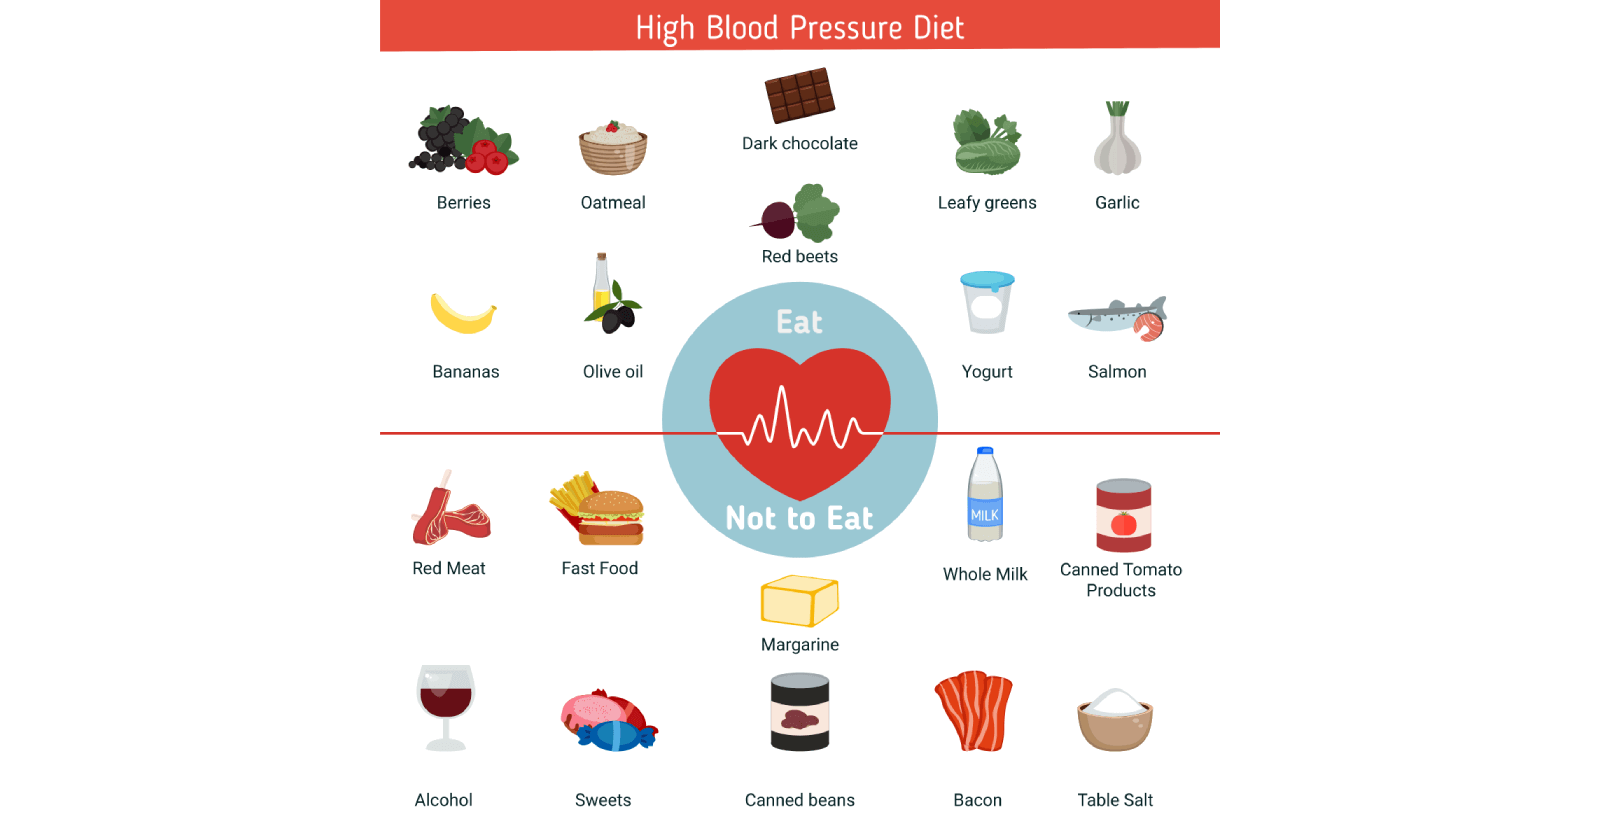 Foods For High Blood Pressure: What To Eat And What To Avoid